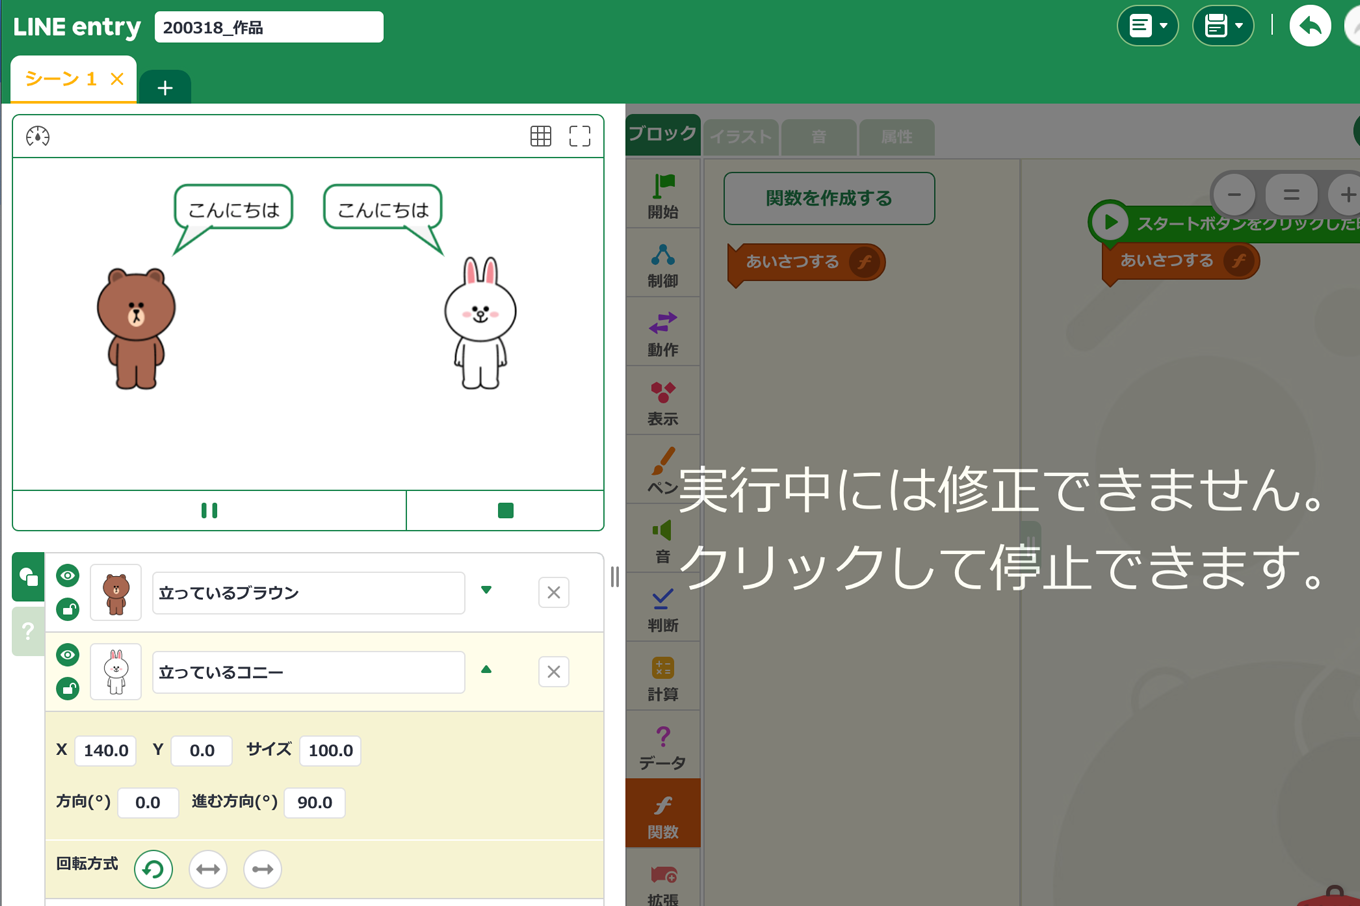 ScratchとLINE entryの違い